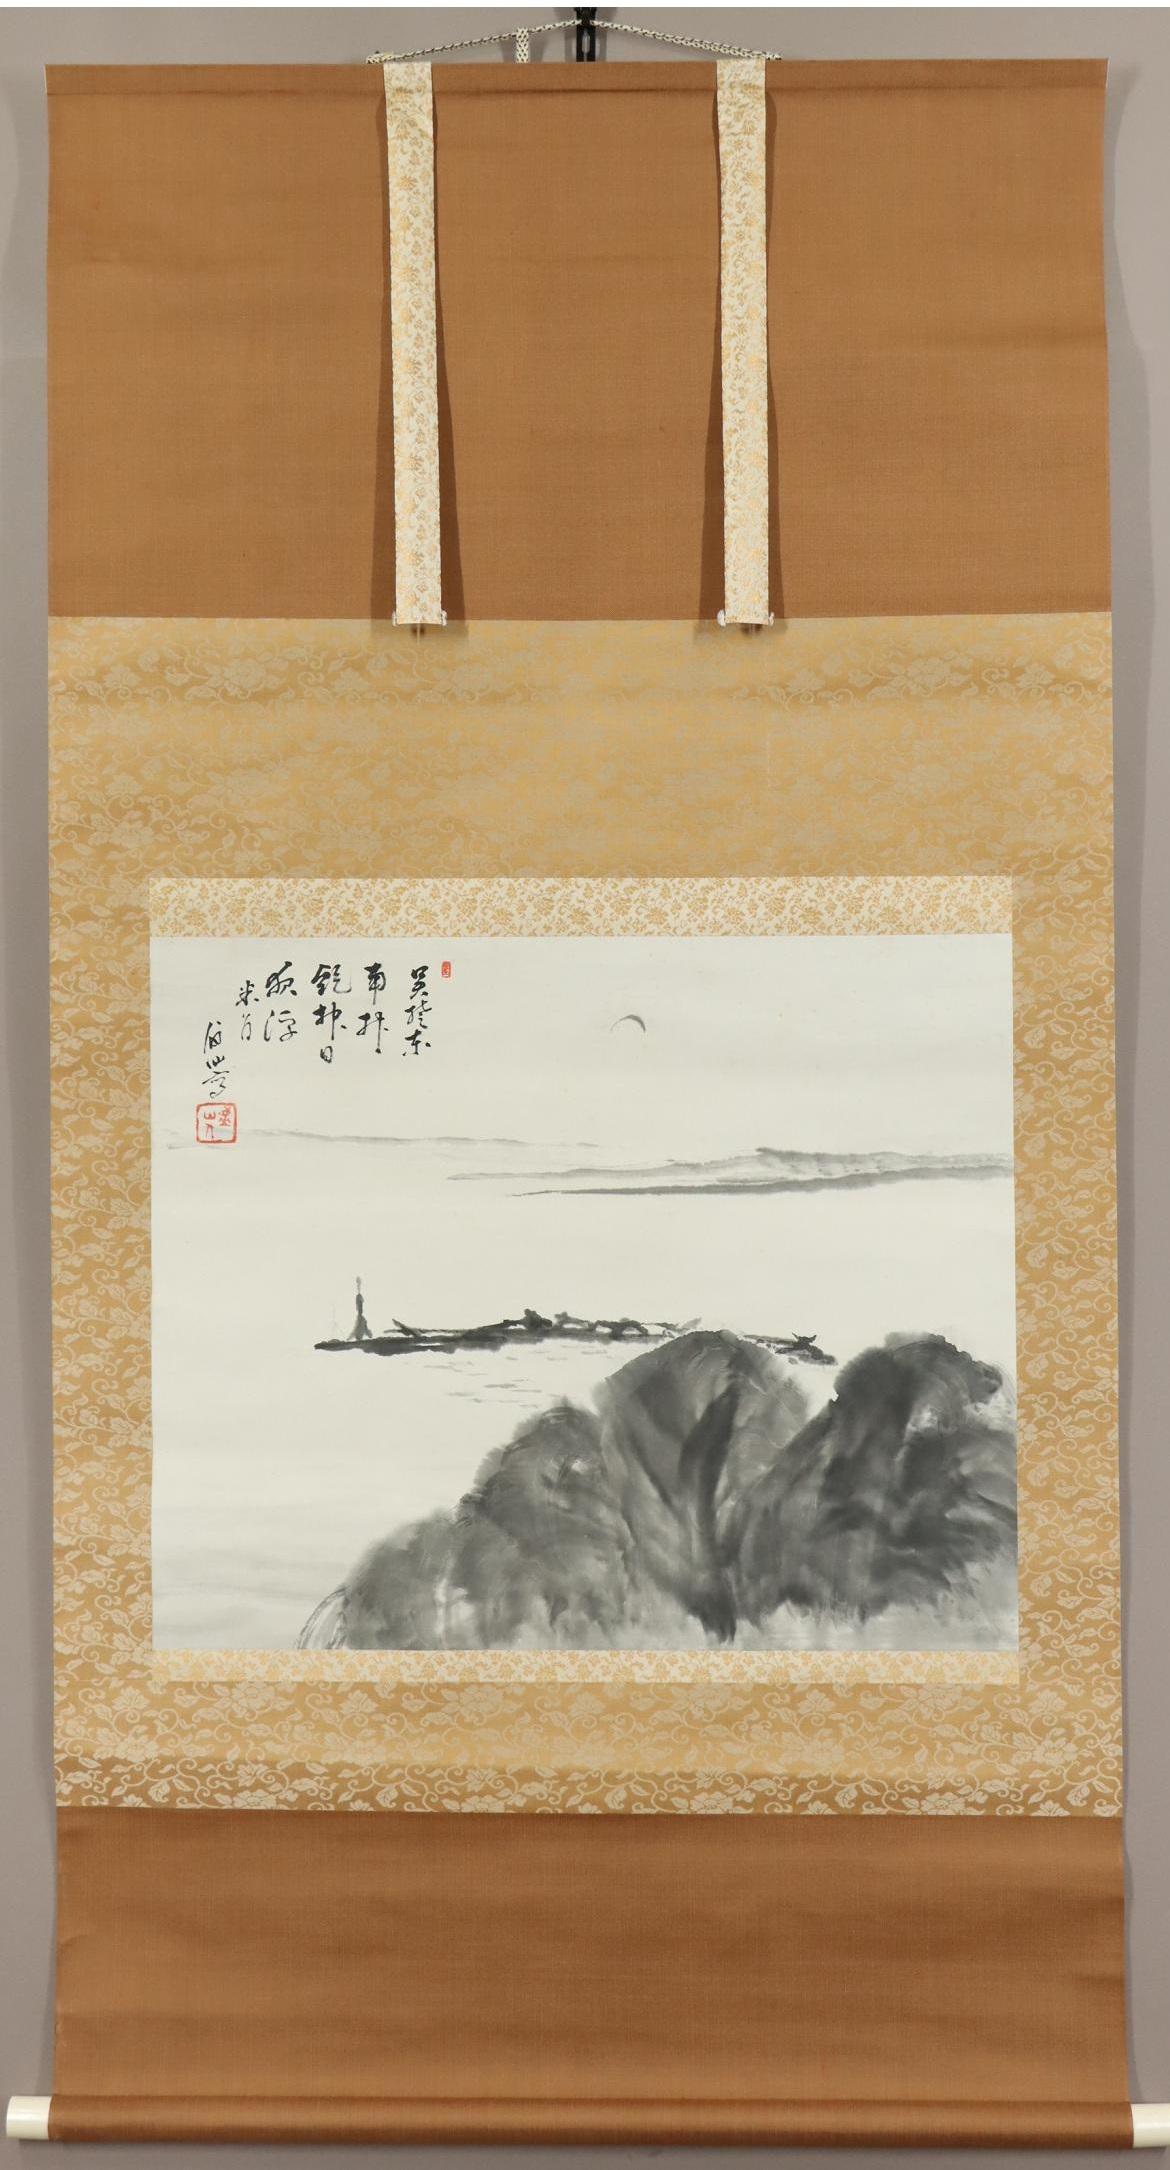 [Authentic Artwork] ◆ Bisen Fukuda ◆ Chinese Landscape ◆ Lake Dongting ◆ Illustration of the Great Dongting ◆ Box ◆ Handpainted ◆ Paper ◆ Hanging Scroll ◆

Explore the artistic world of Bisen Fukuda through this captivating piece titled 